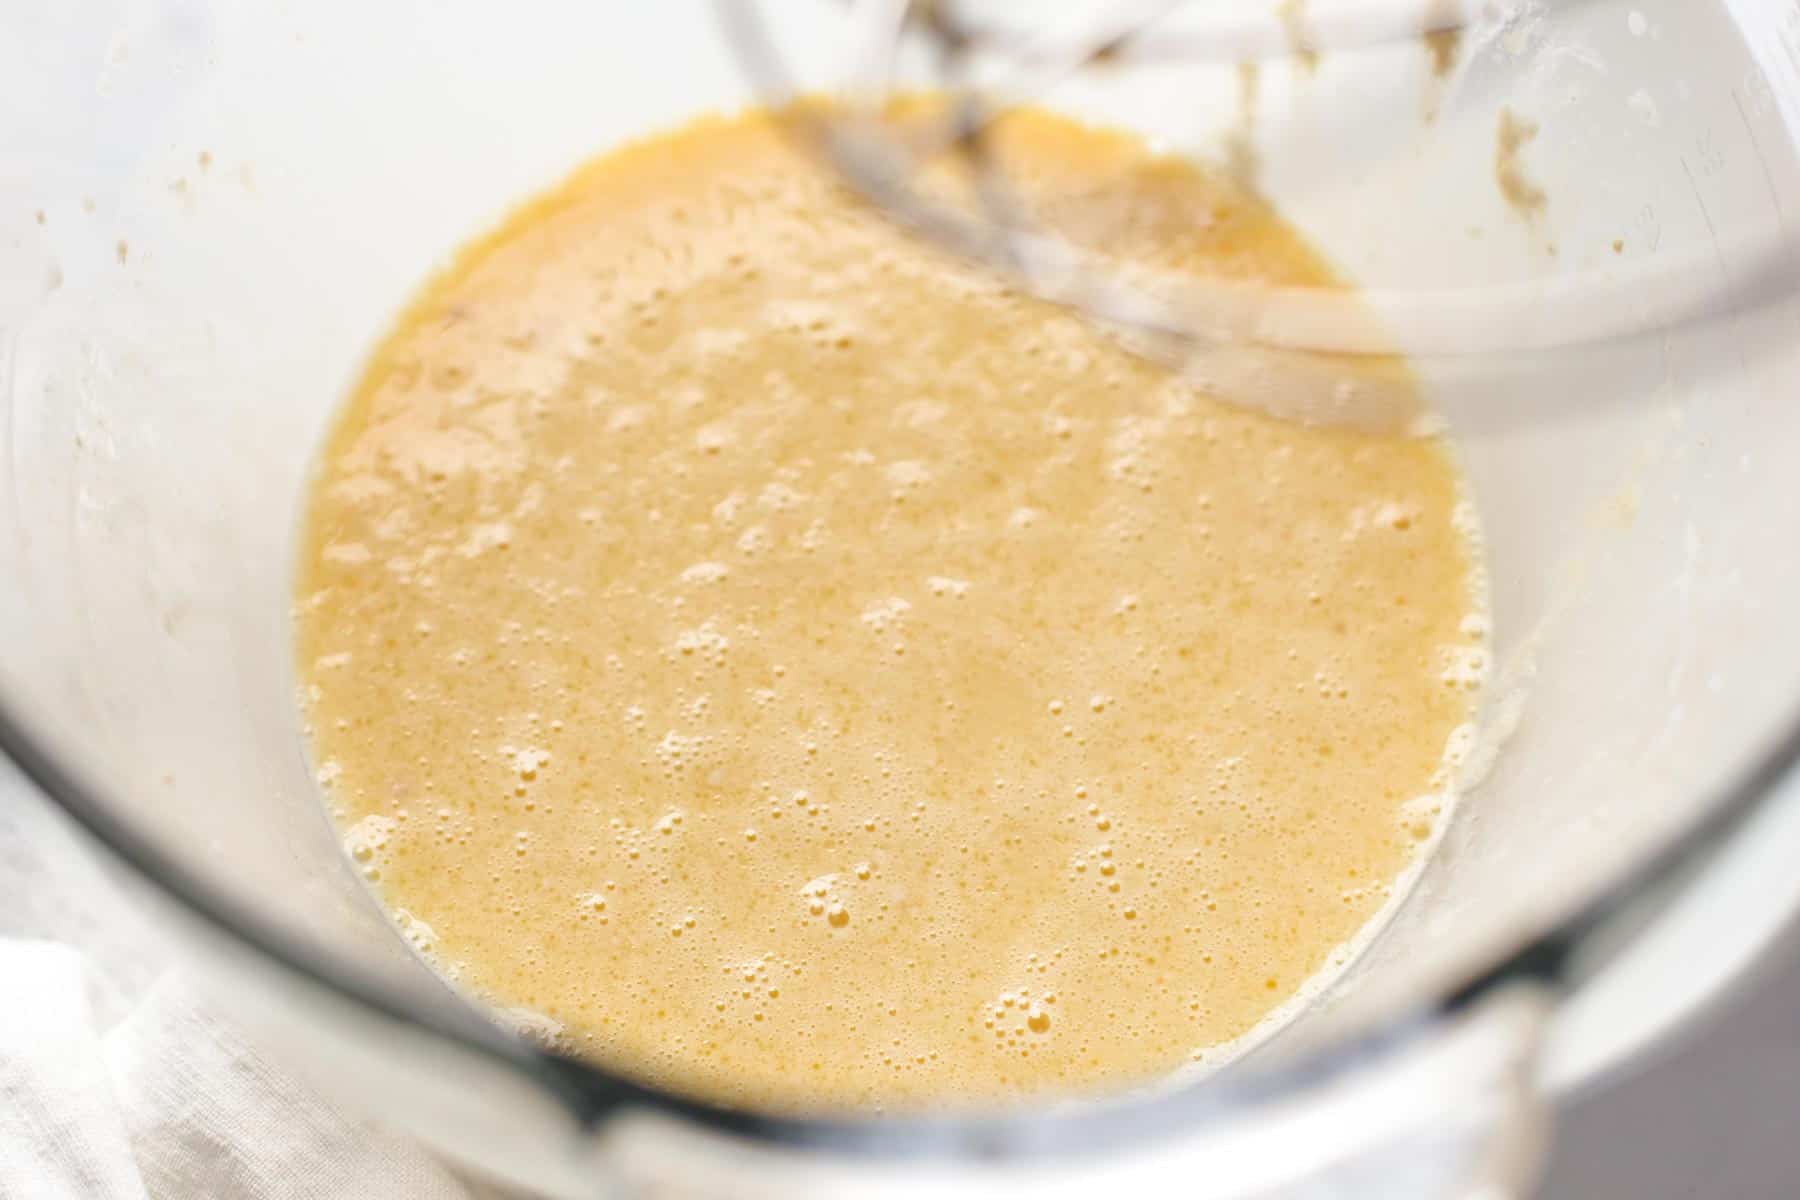 wet yeast dough ingredients in a bowl